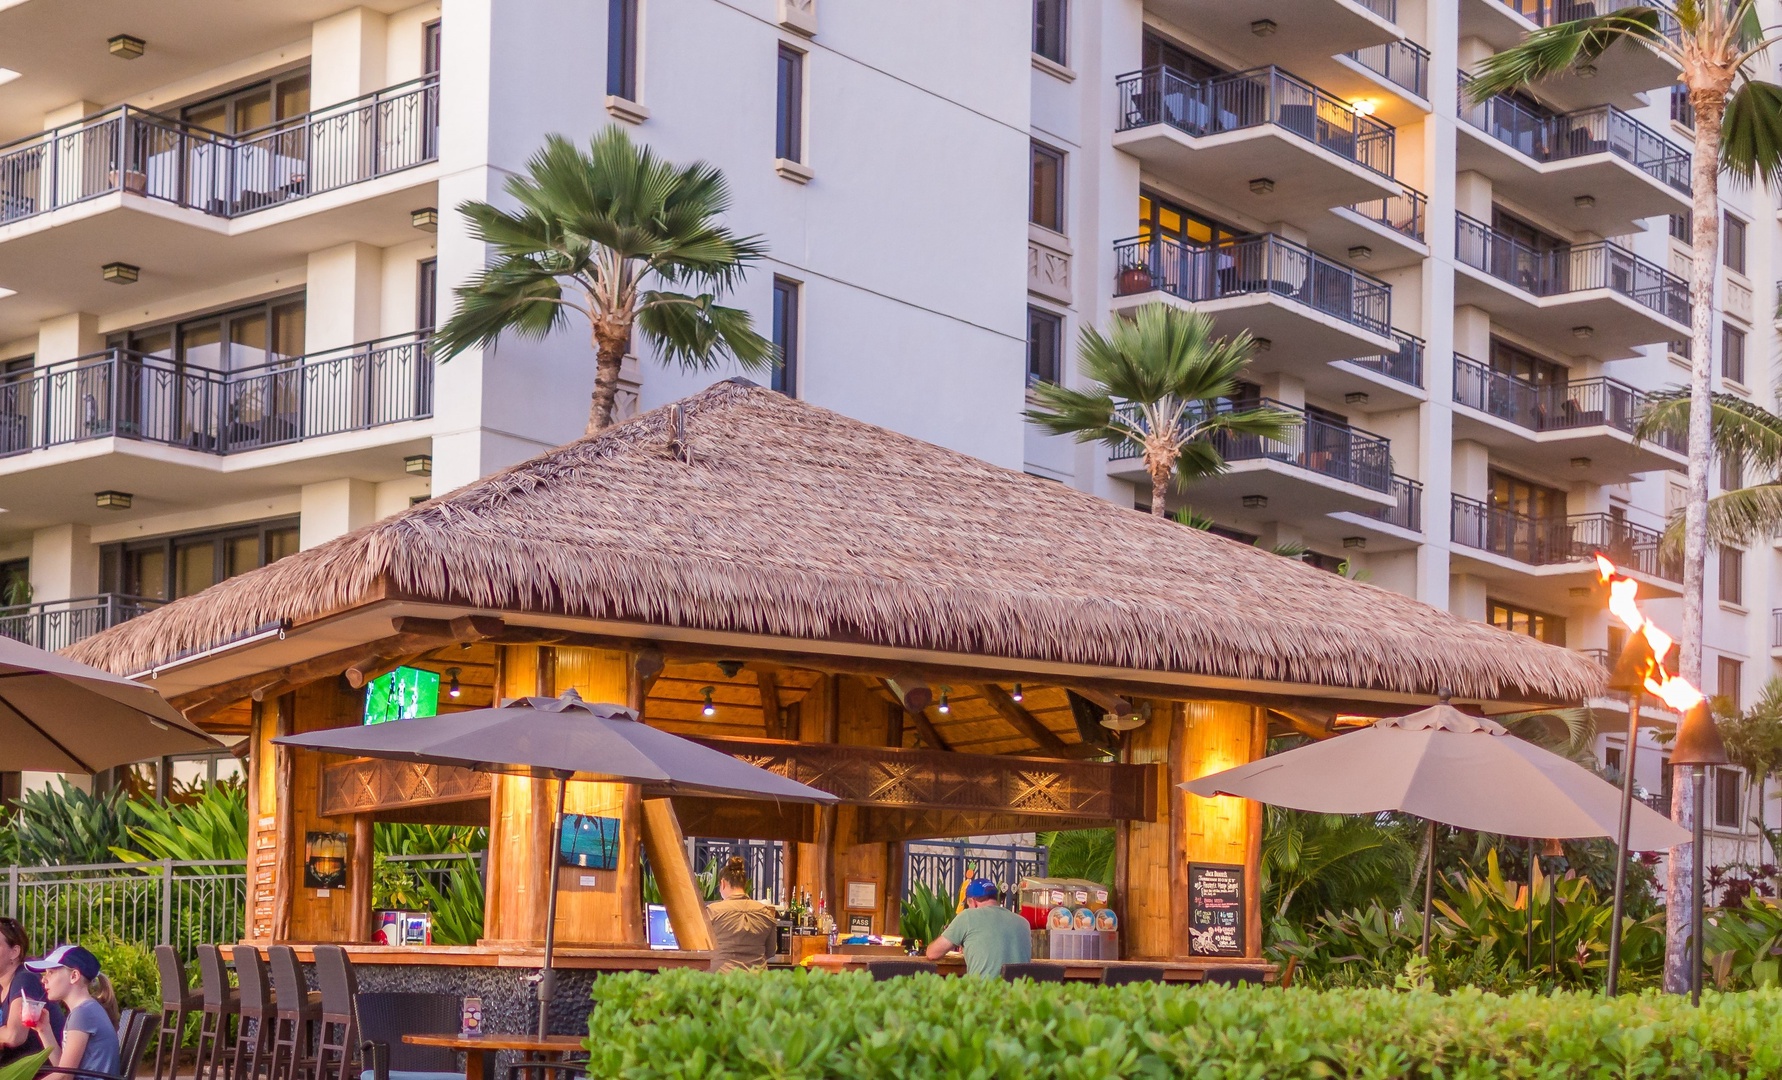 Kapolei Vacation Rentals, Ko Olina Beach Villas O1006 - Private Beach Bar with Stools and Outdoor Dining Tables Sets with Table Umbrellas.